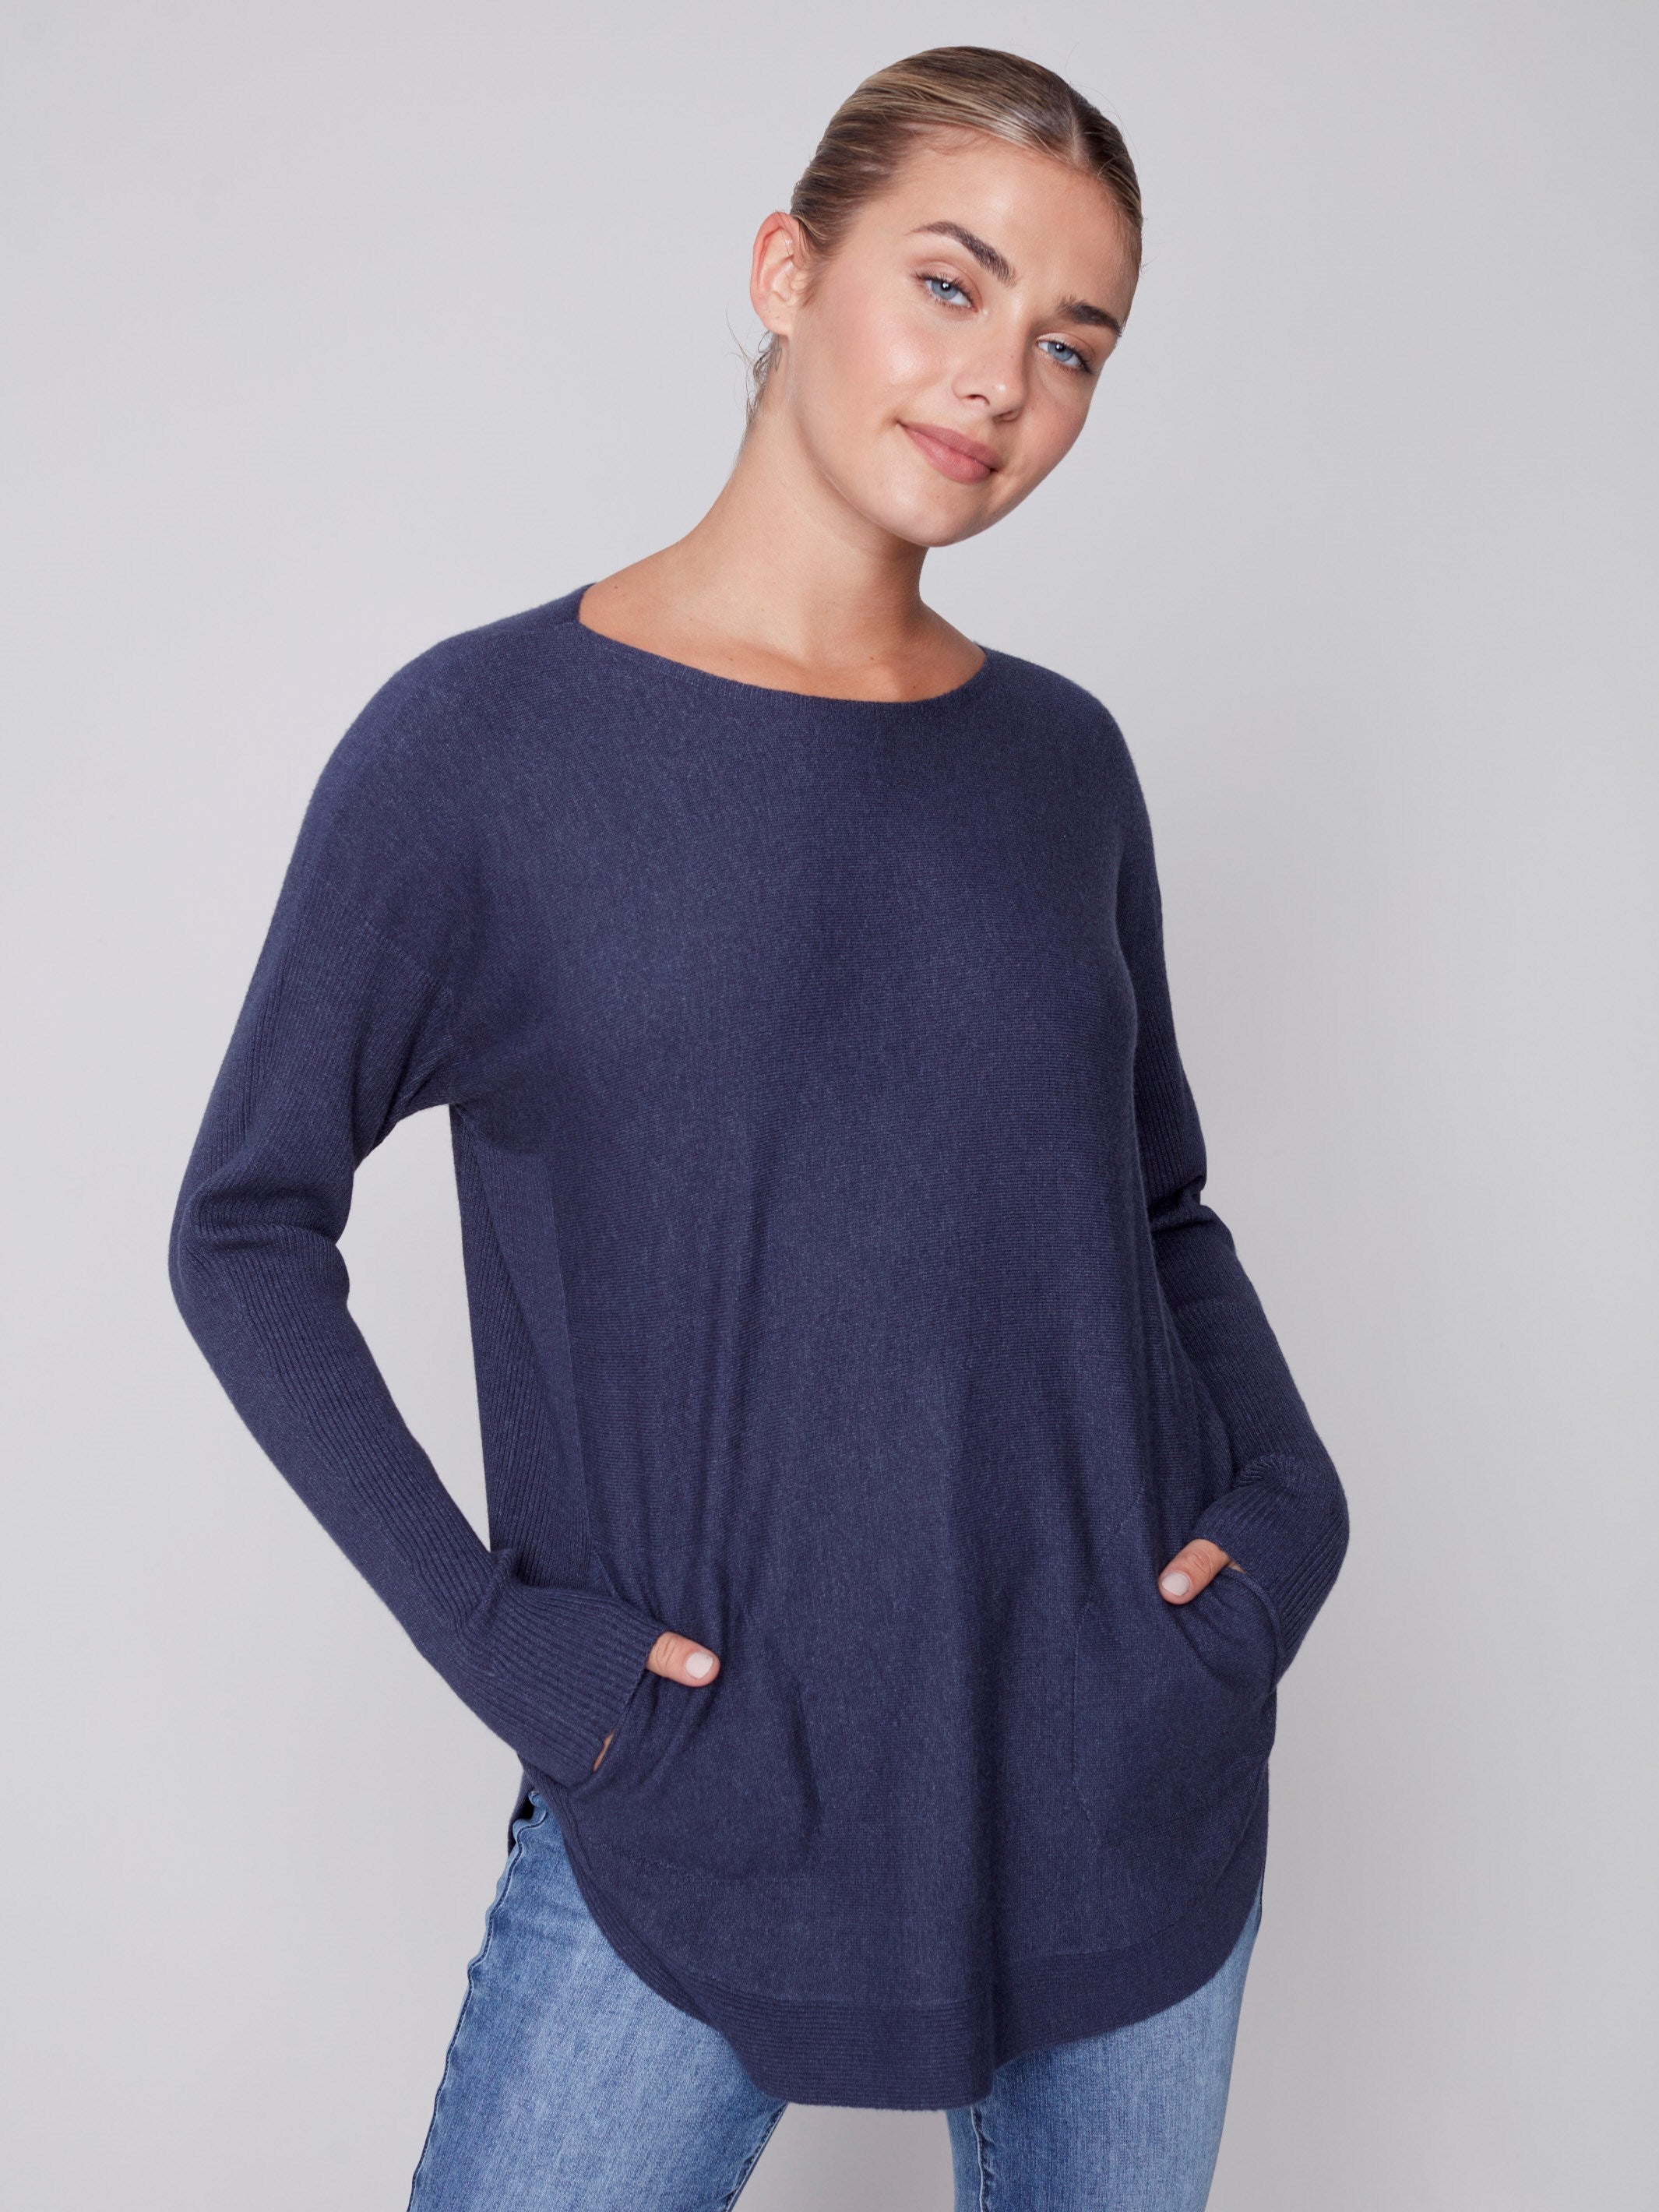 Knit Sweater with Back Lace-up Detail - Denim